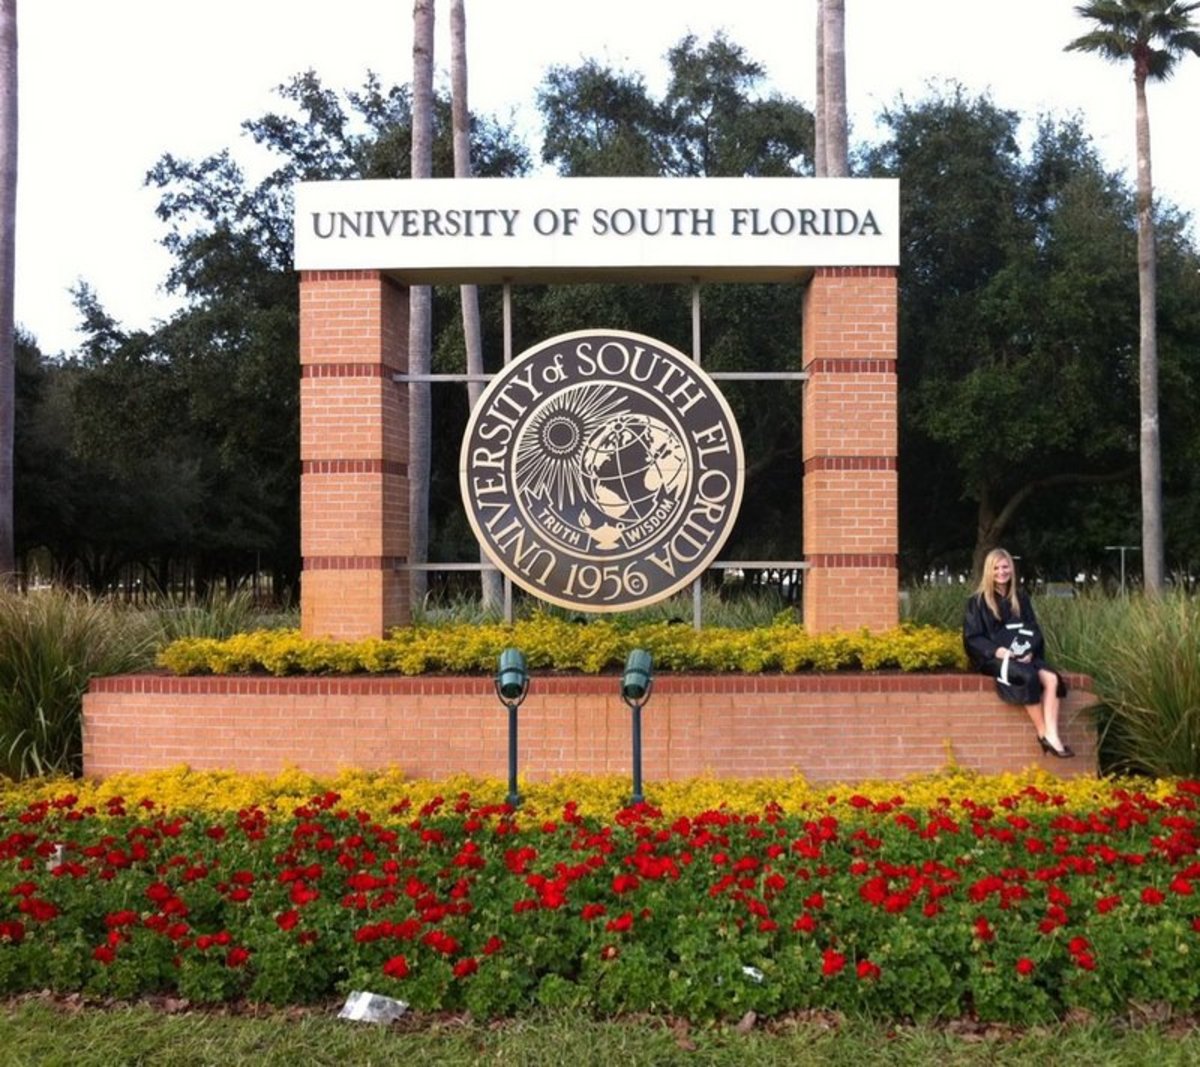 The graduate in front of the University of South Florida sign.